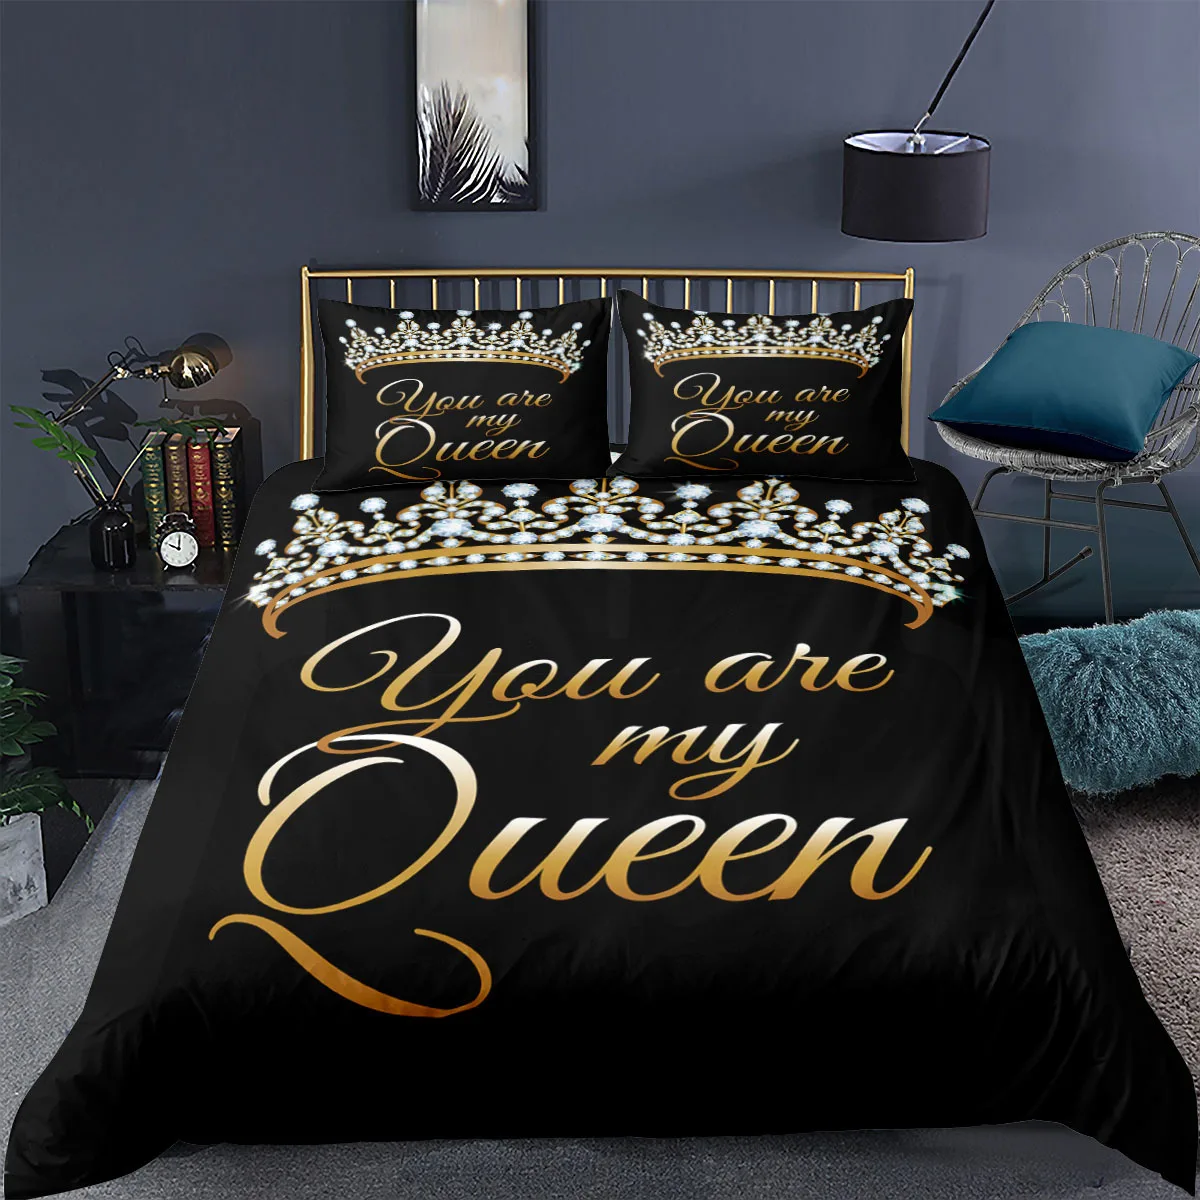 

Luxury French Lovers Bedding Sets 3 Piece Letter Duvet Cover with Zipper Ties Couple Bedspreads Romantic Valentines Presents